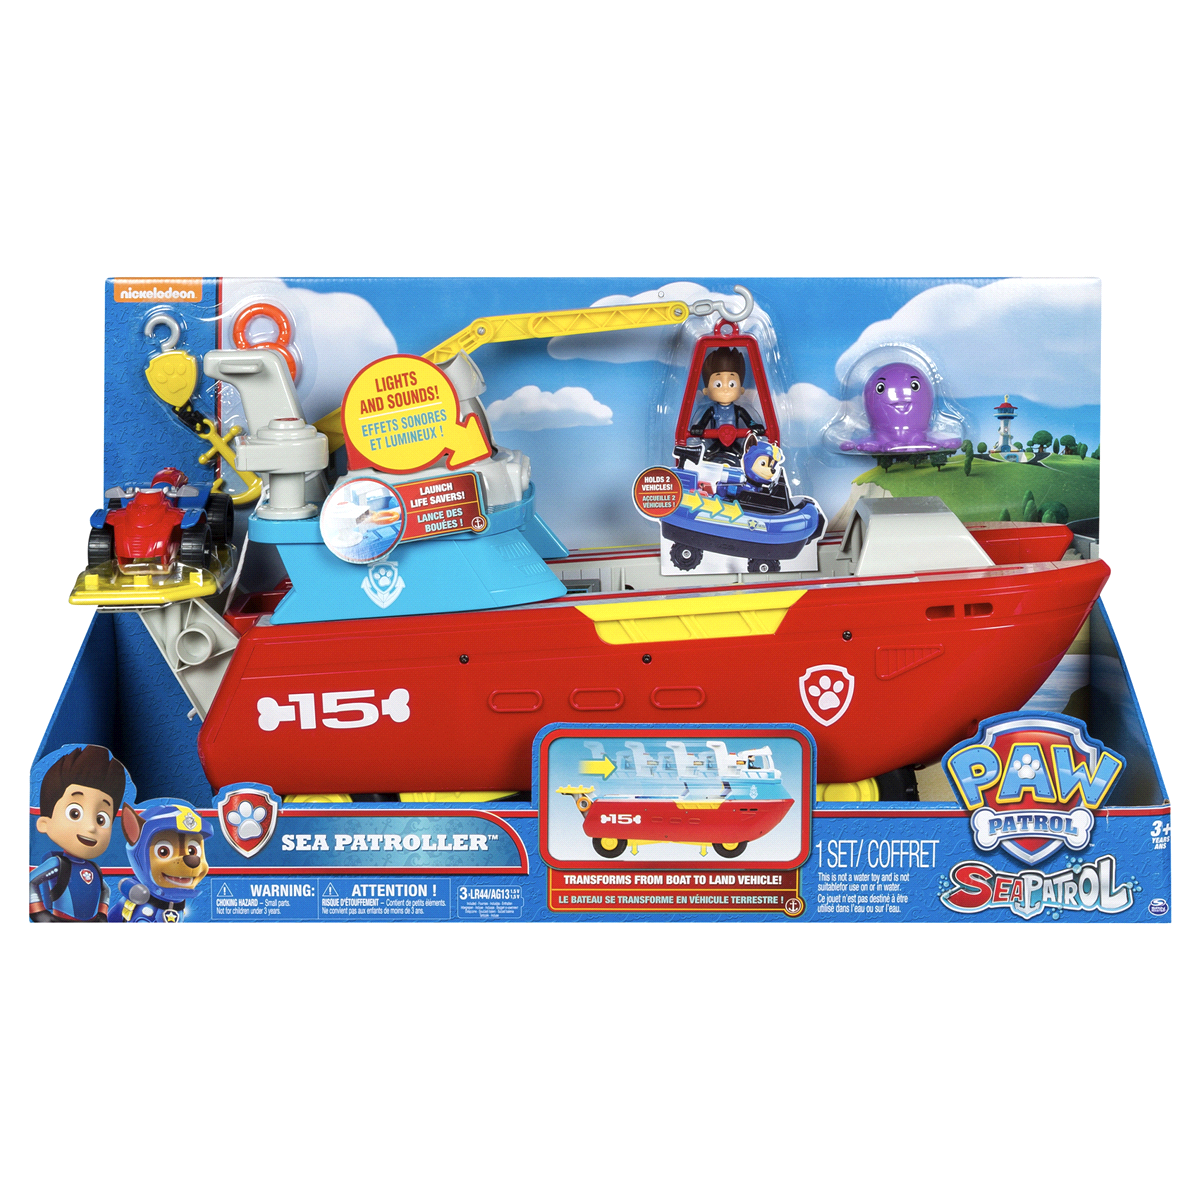 slide 10 of 16, PAW Patrol Sea Patrol - Sea Patroller Transforming Vehicle With Lights And Sounds, 1 ct